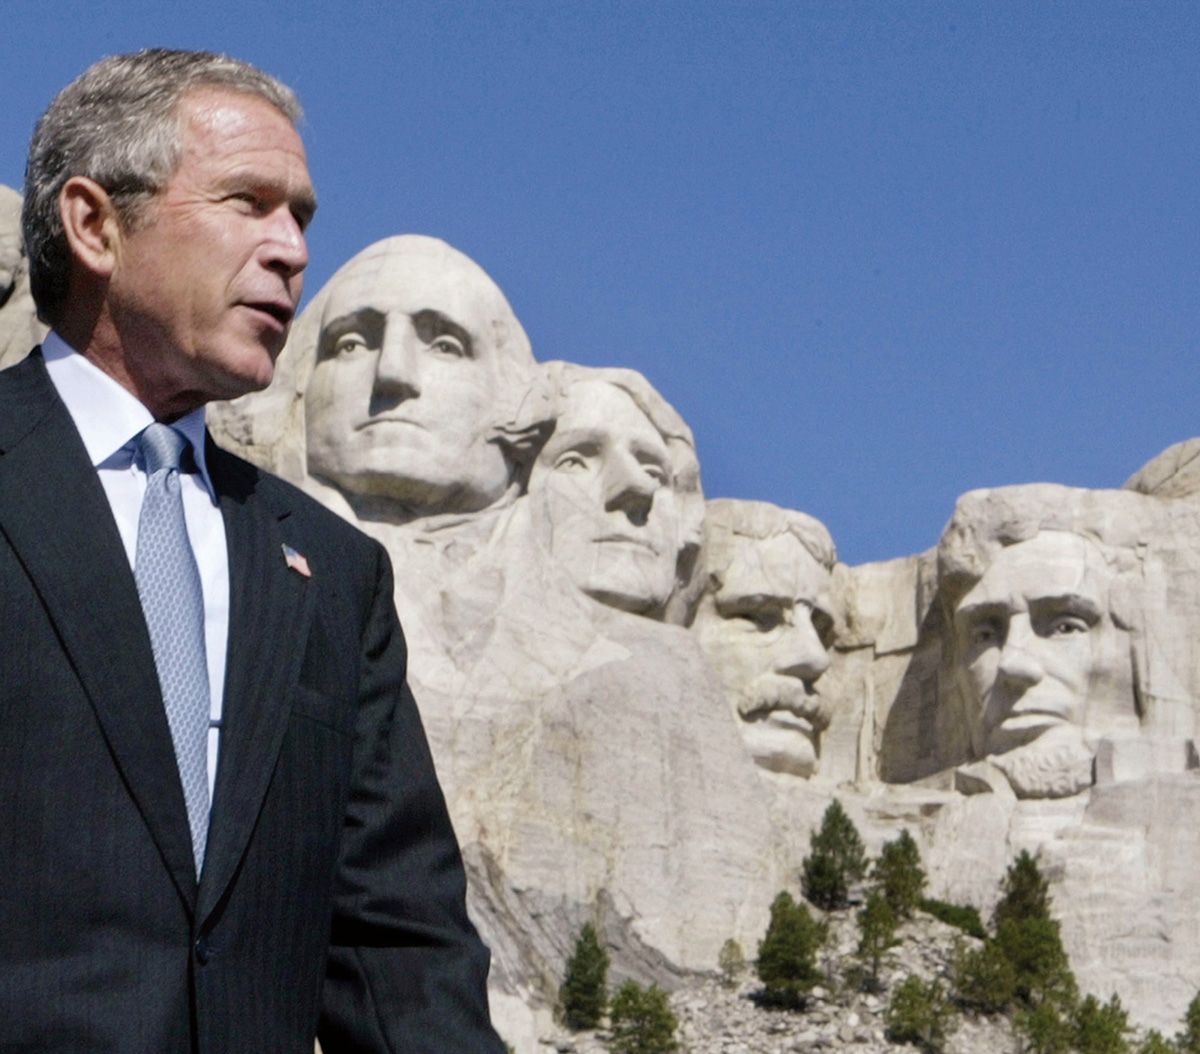 George W. Bush trying out for Mount Rushmore, 15 August 2002.
Photo Reuters/Larry Downing.